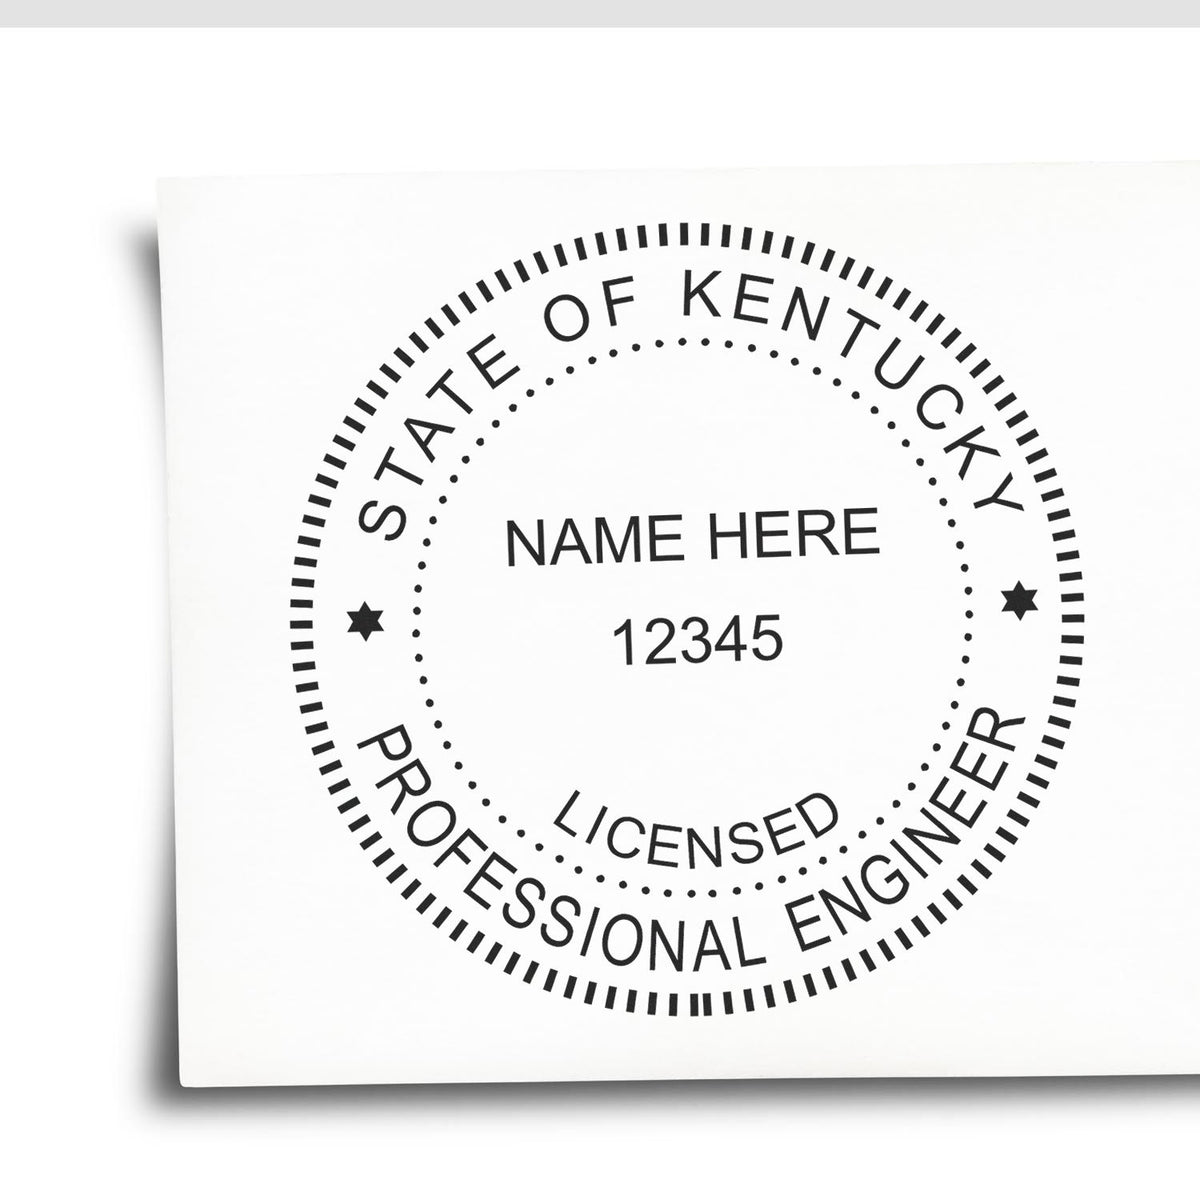 A lifestyle photo showing a stamped image of the Slim Pre-Inked Kentucky Professional Engineer Seal Stamp on a piece of paper